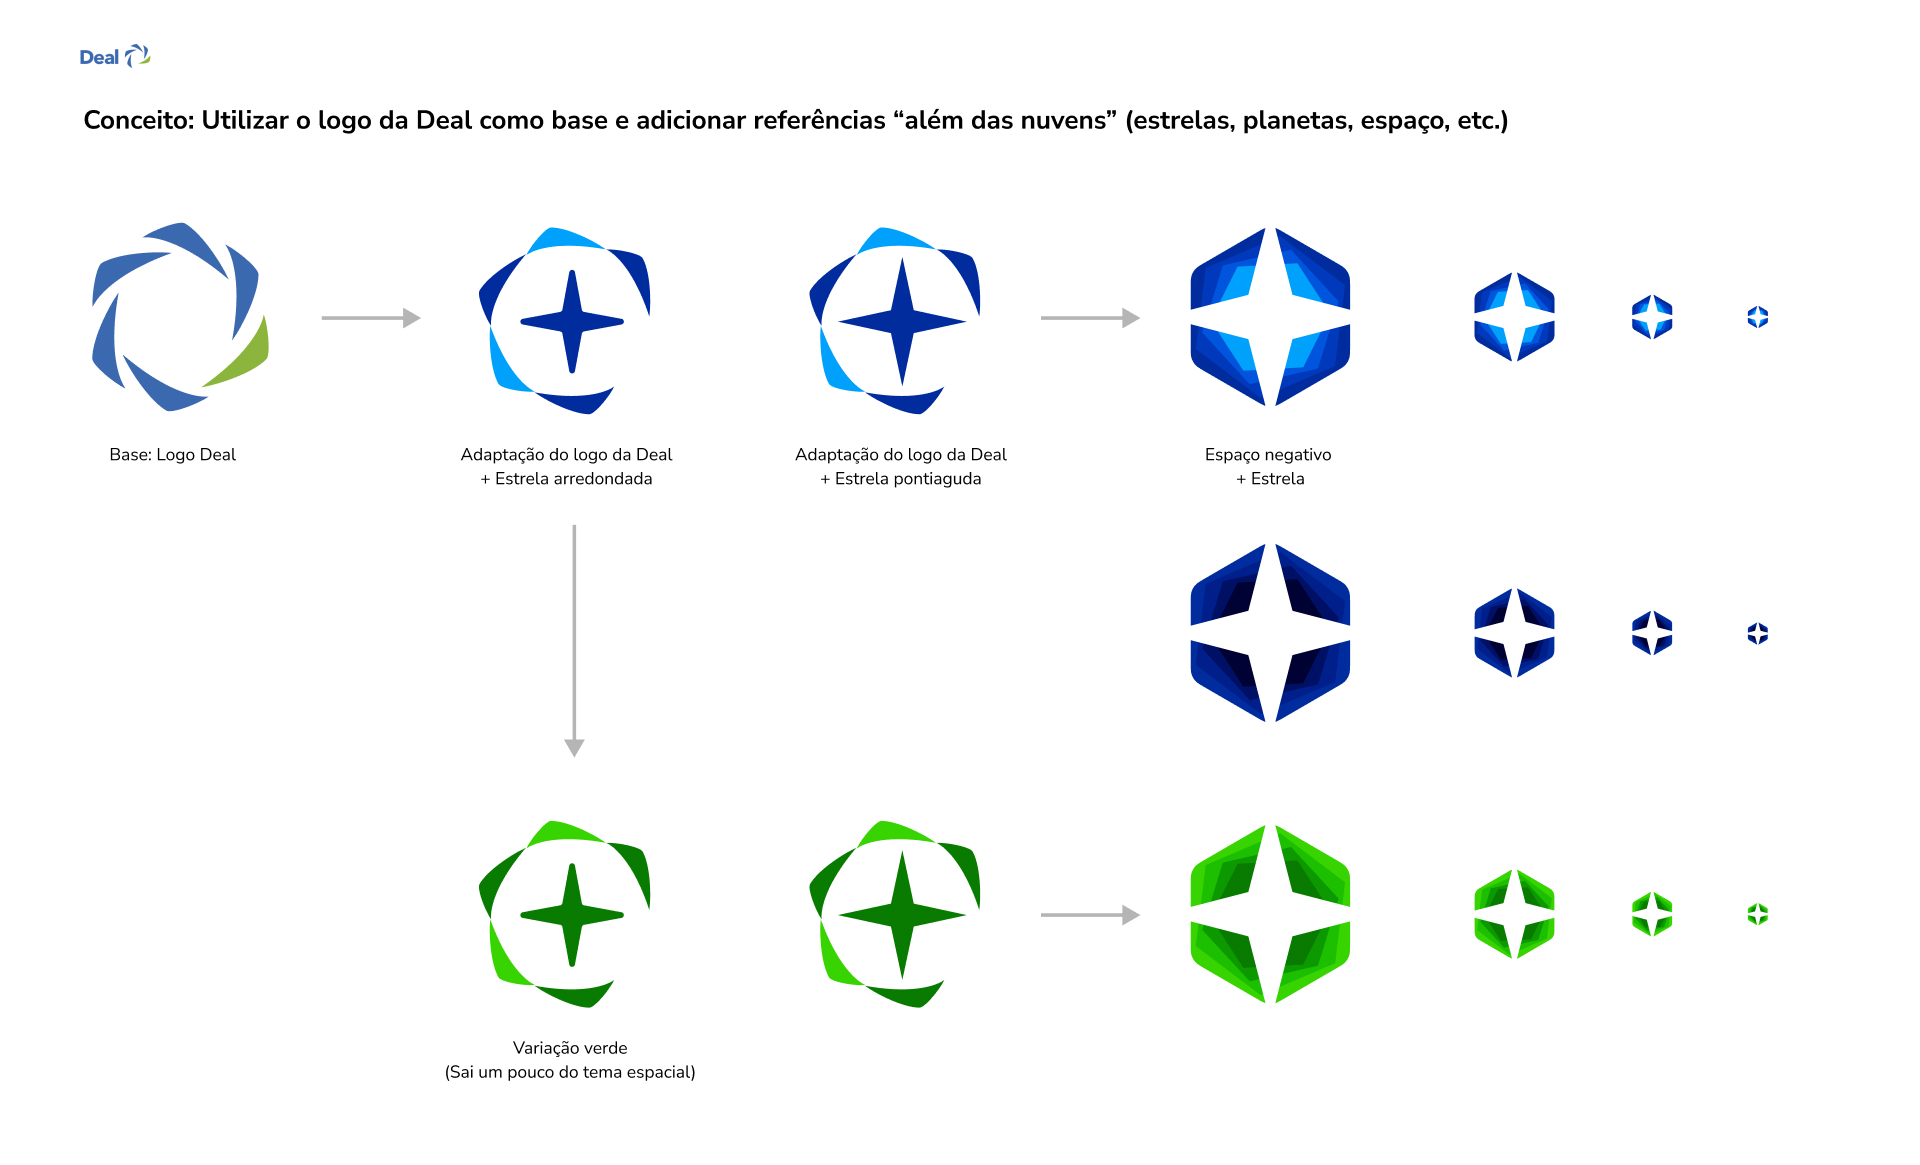 Cloud Culture branding detailed evolution from Deal's branding. The logo contains a four-points star over geometric shapes in fading color.